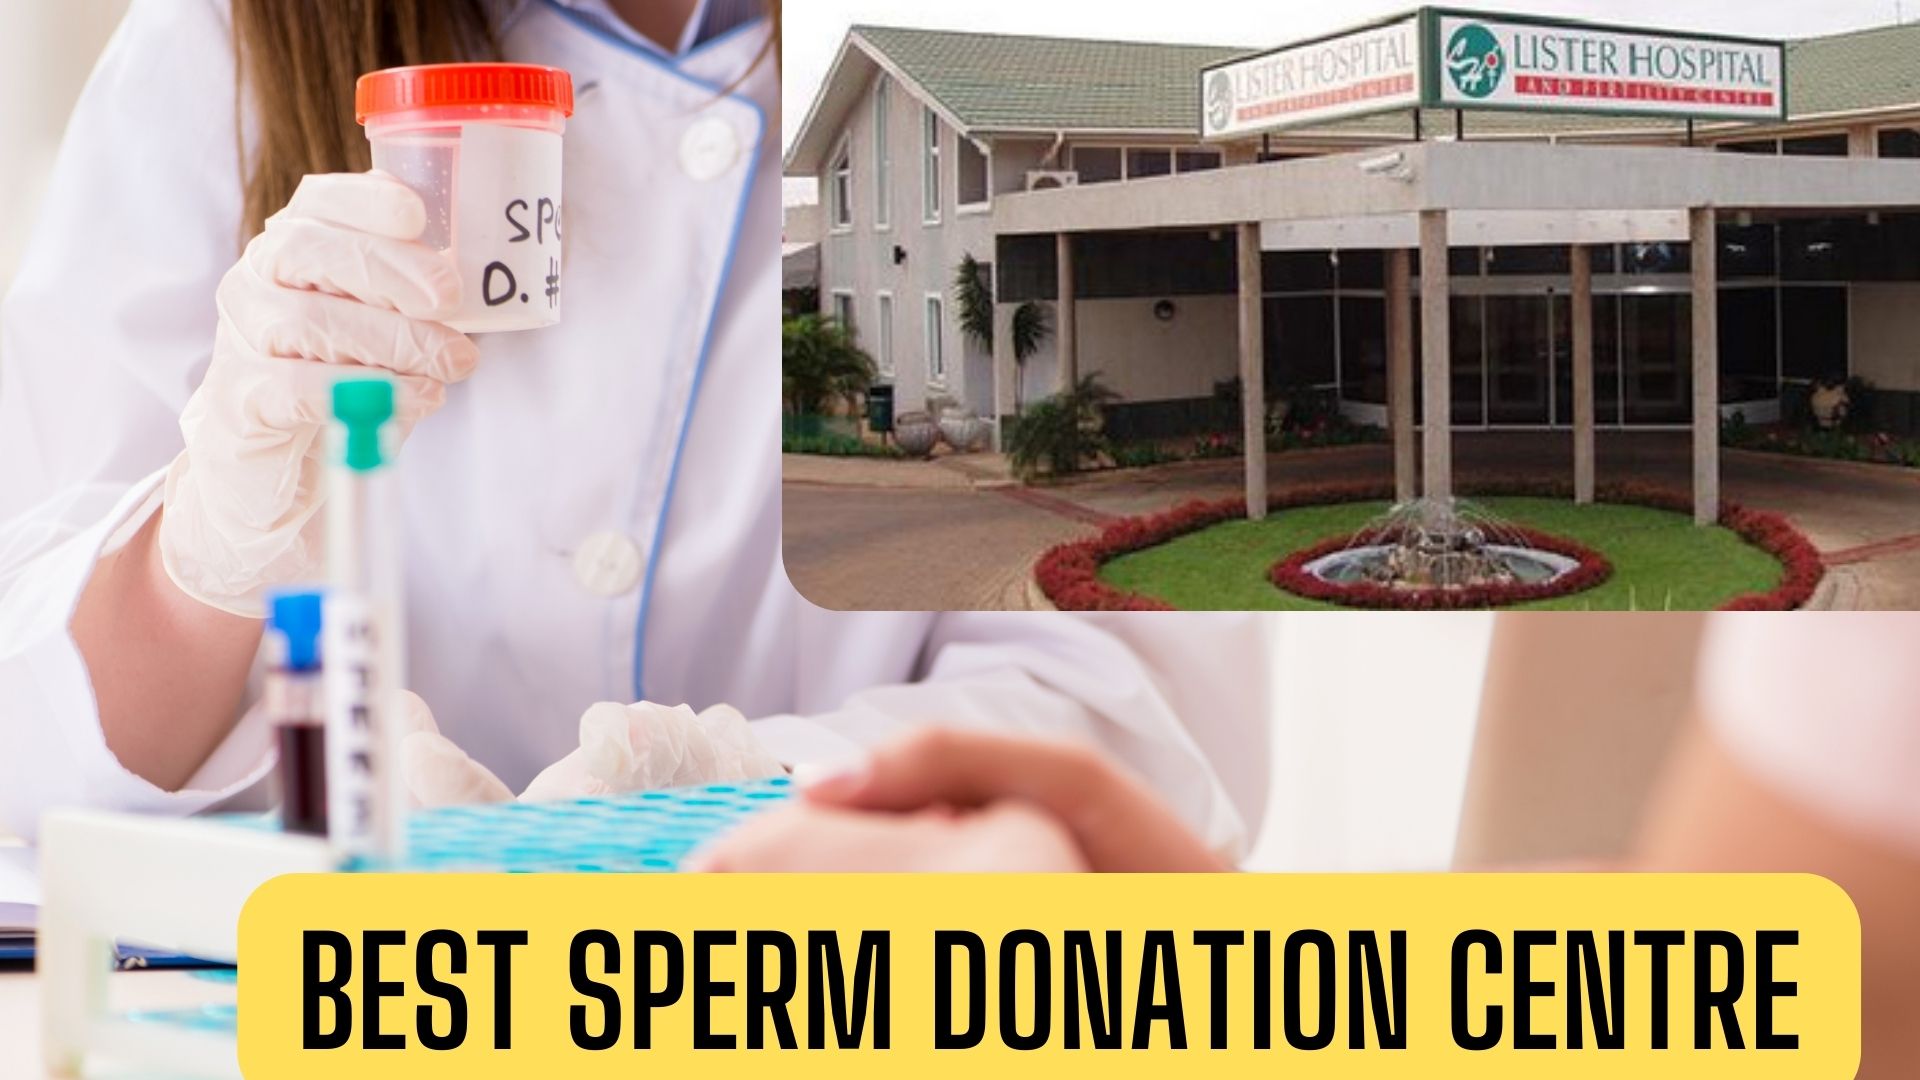 Top 10 Sperm Donation Centers In Ghana